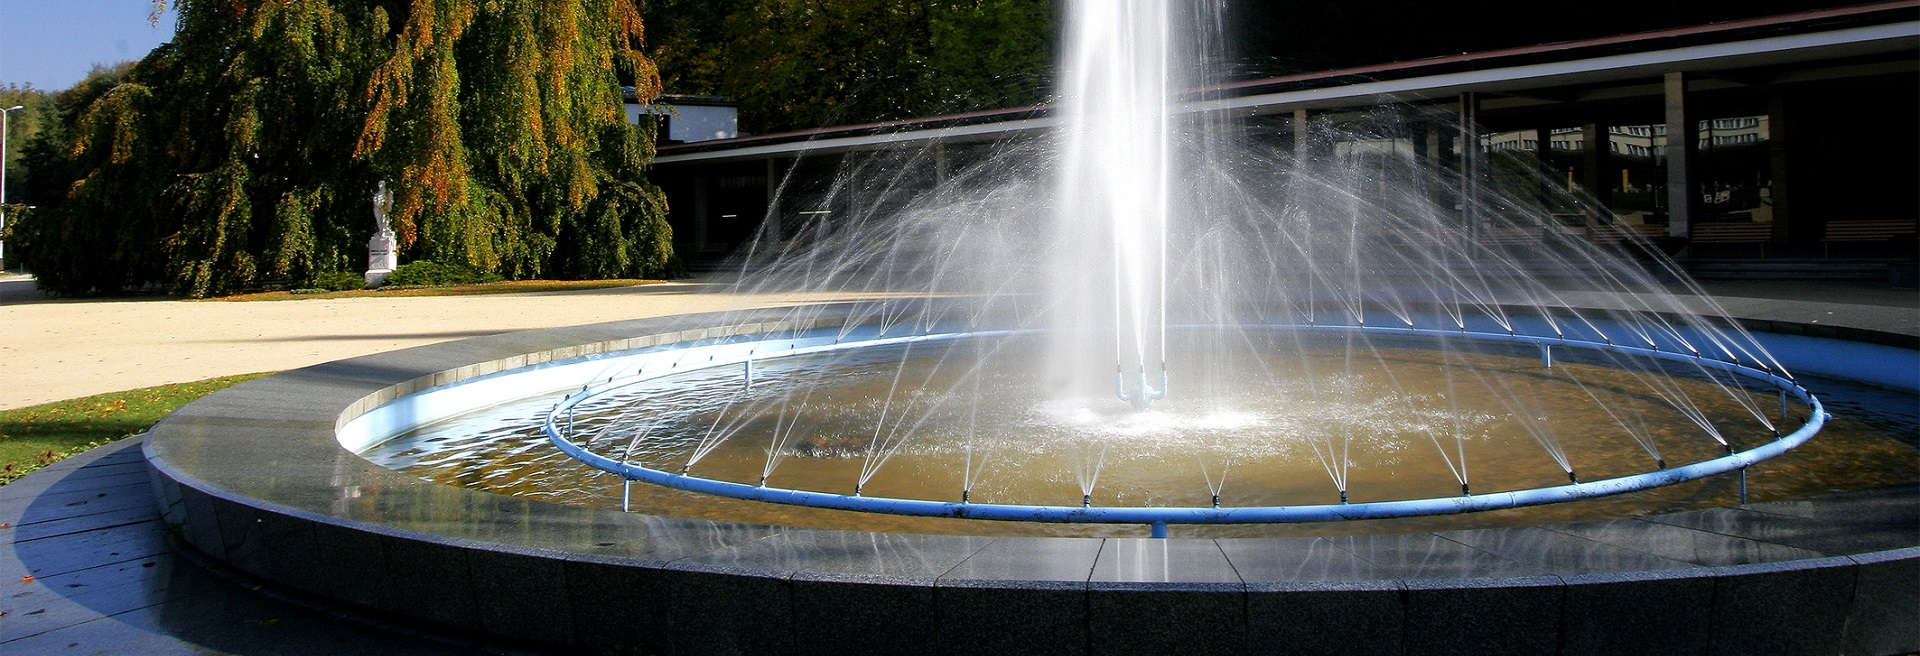 Fountain in spa town Luhačovice